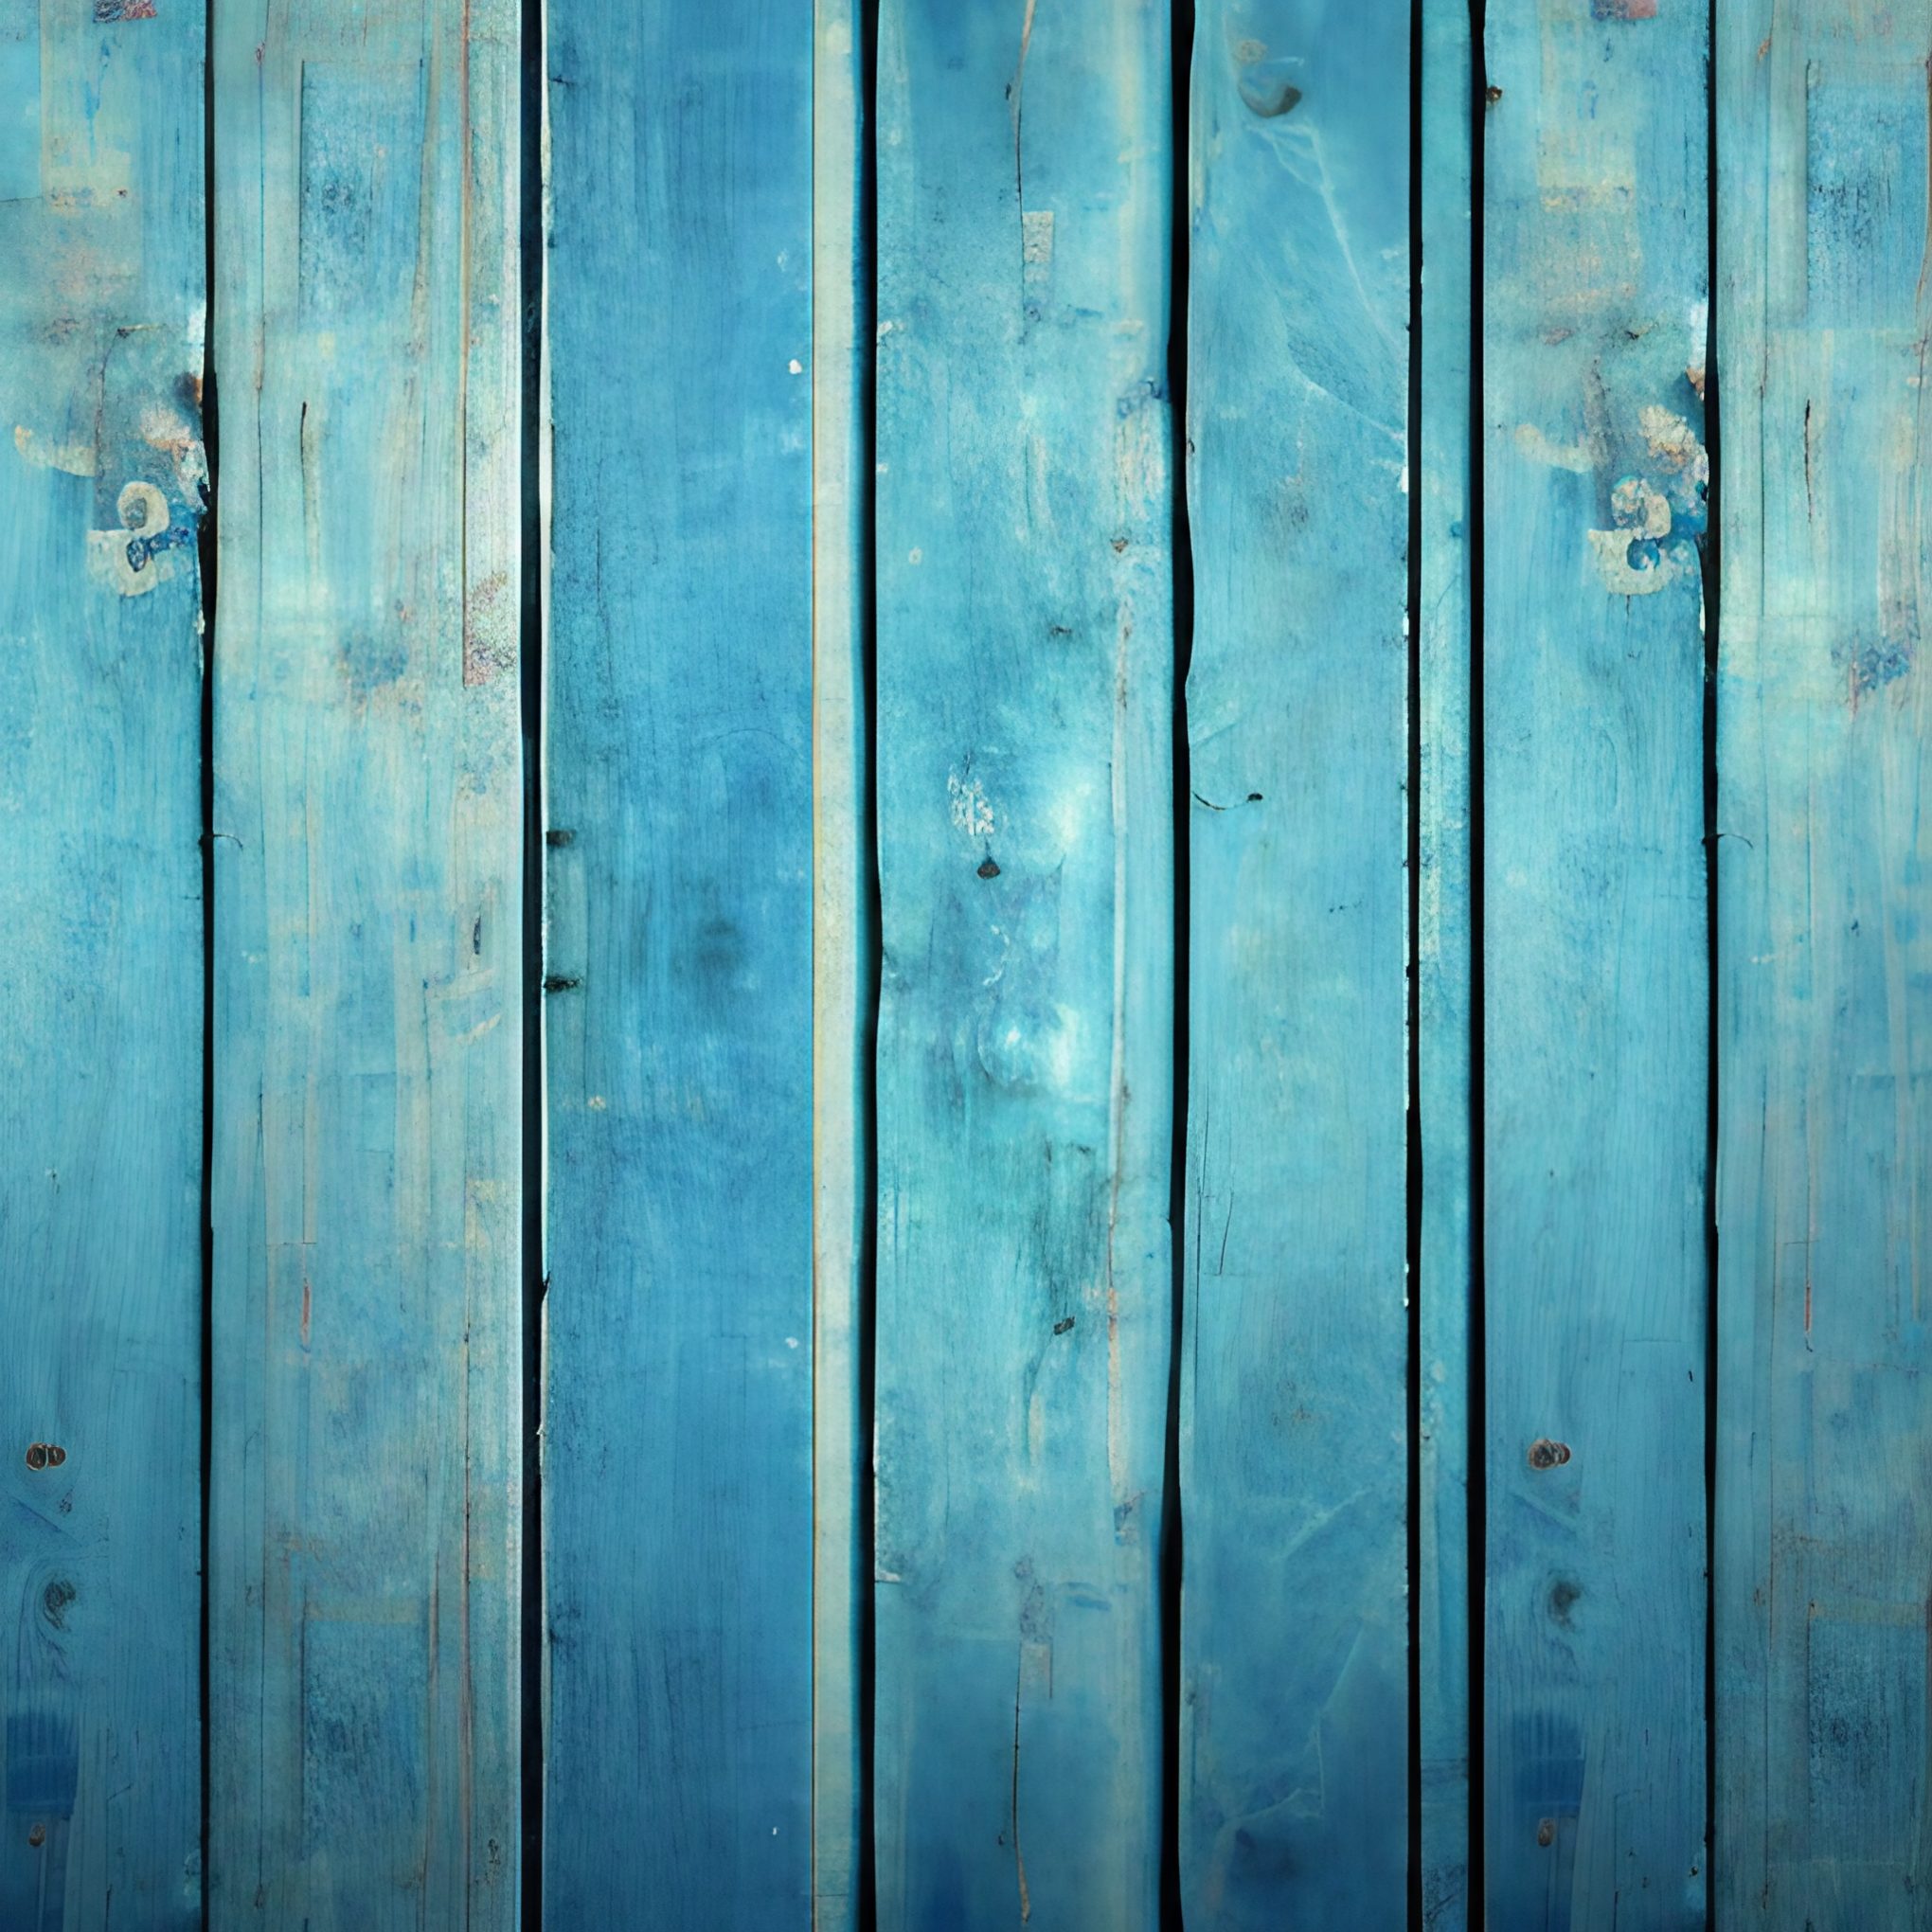 Blue Painted Rustic Fence Shabby Chic Coastal Interior Design Background